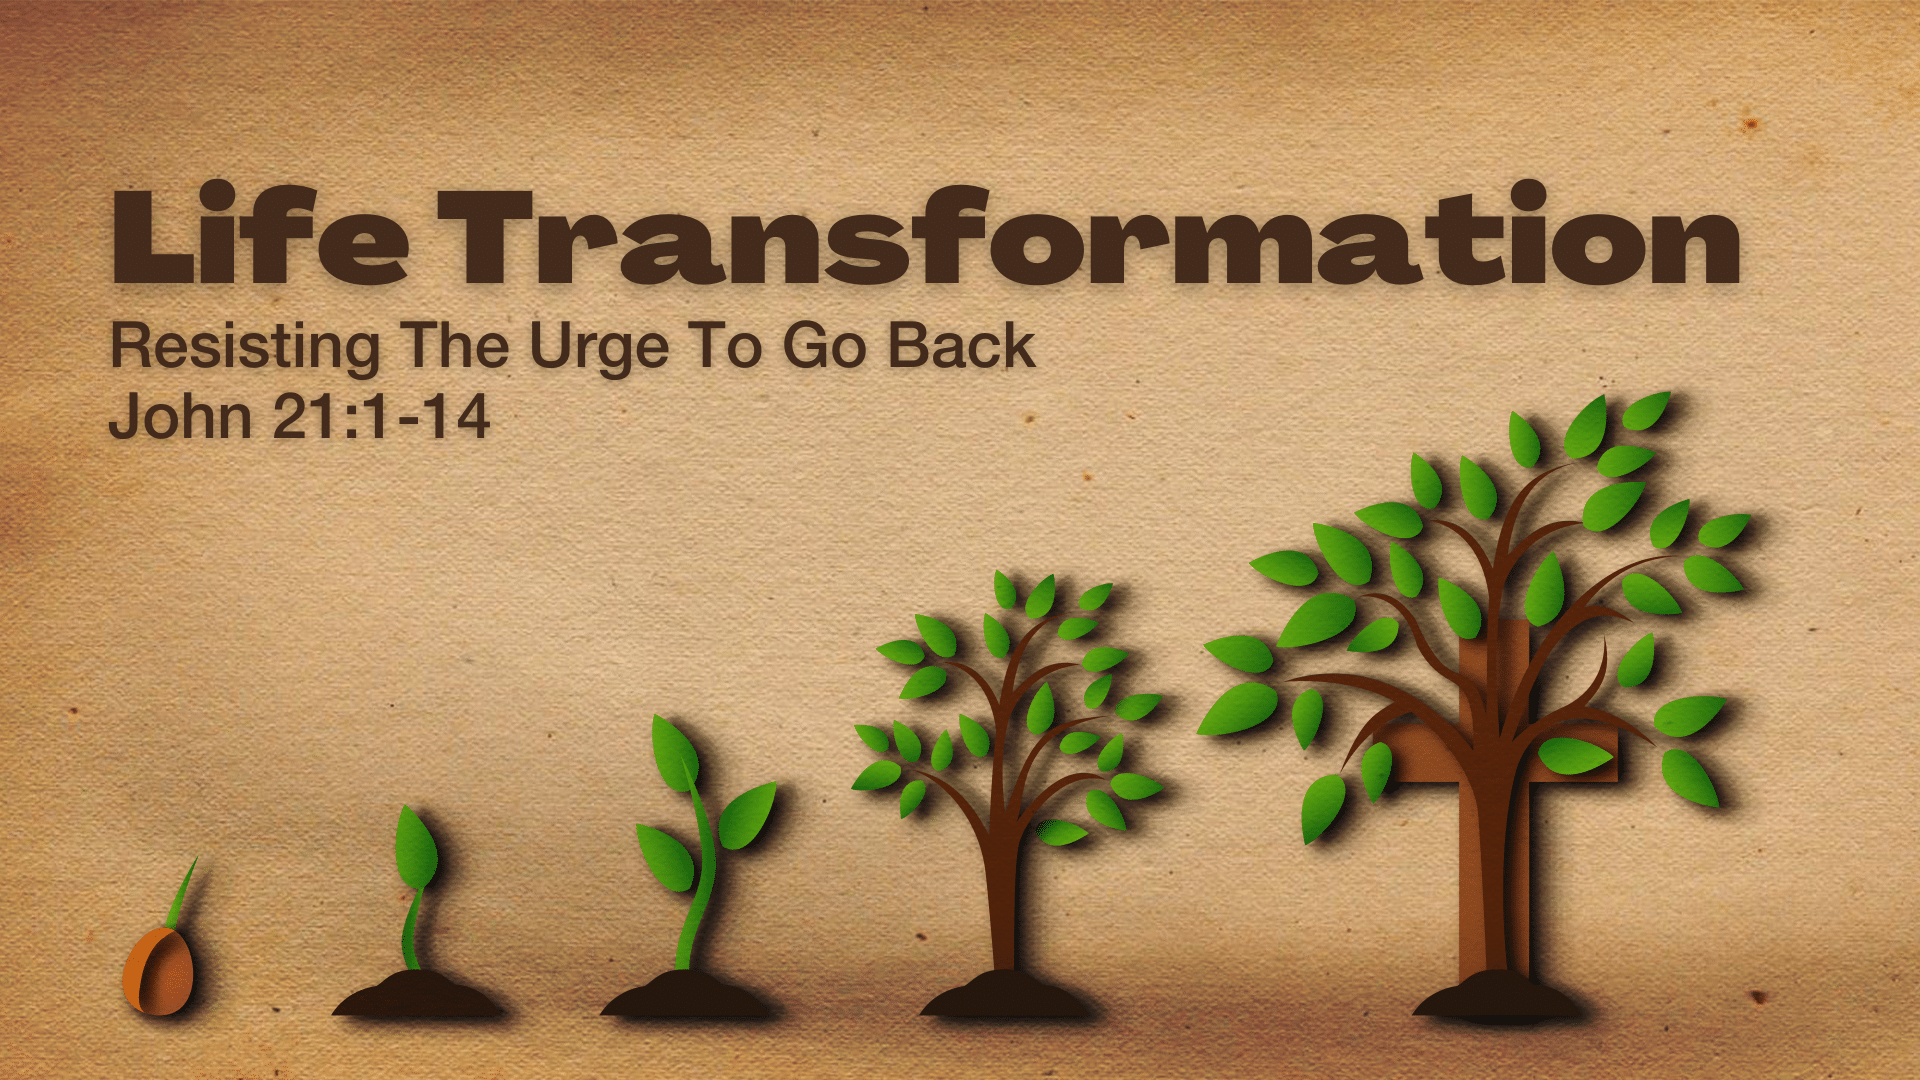 Life Transformation: Resisting The Urge To Go Back